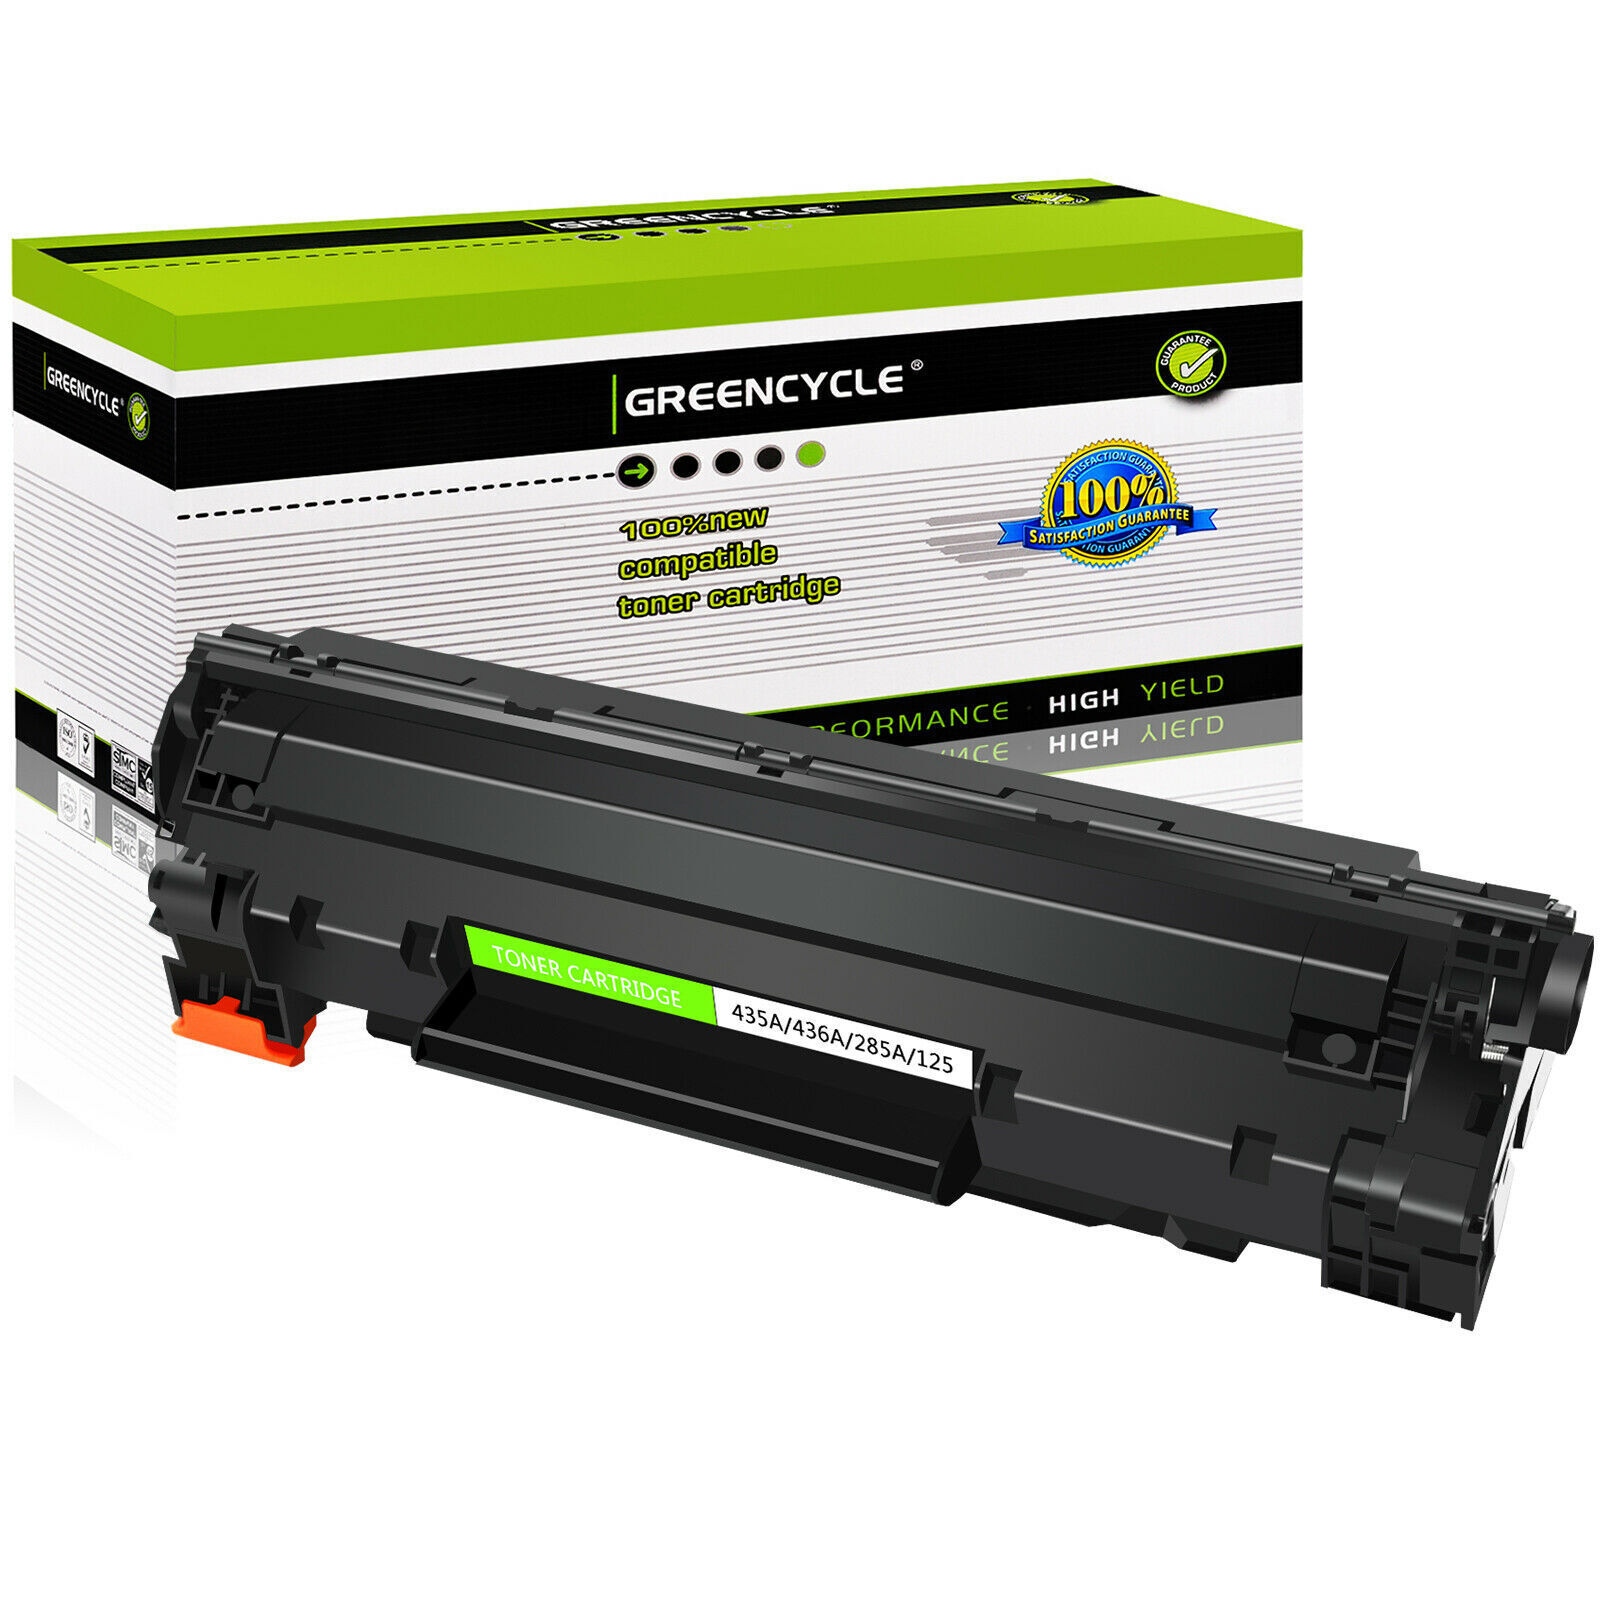 GREENCYCLE 1PK CRG125 Toner Cartridge Compatible for Canon 125 imageCLASS MF3010